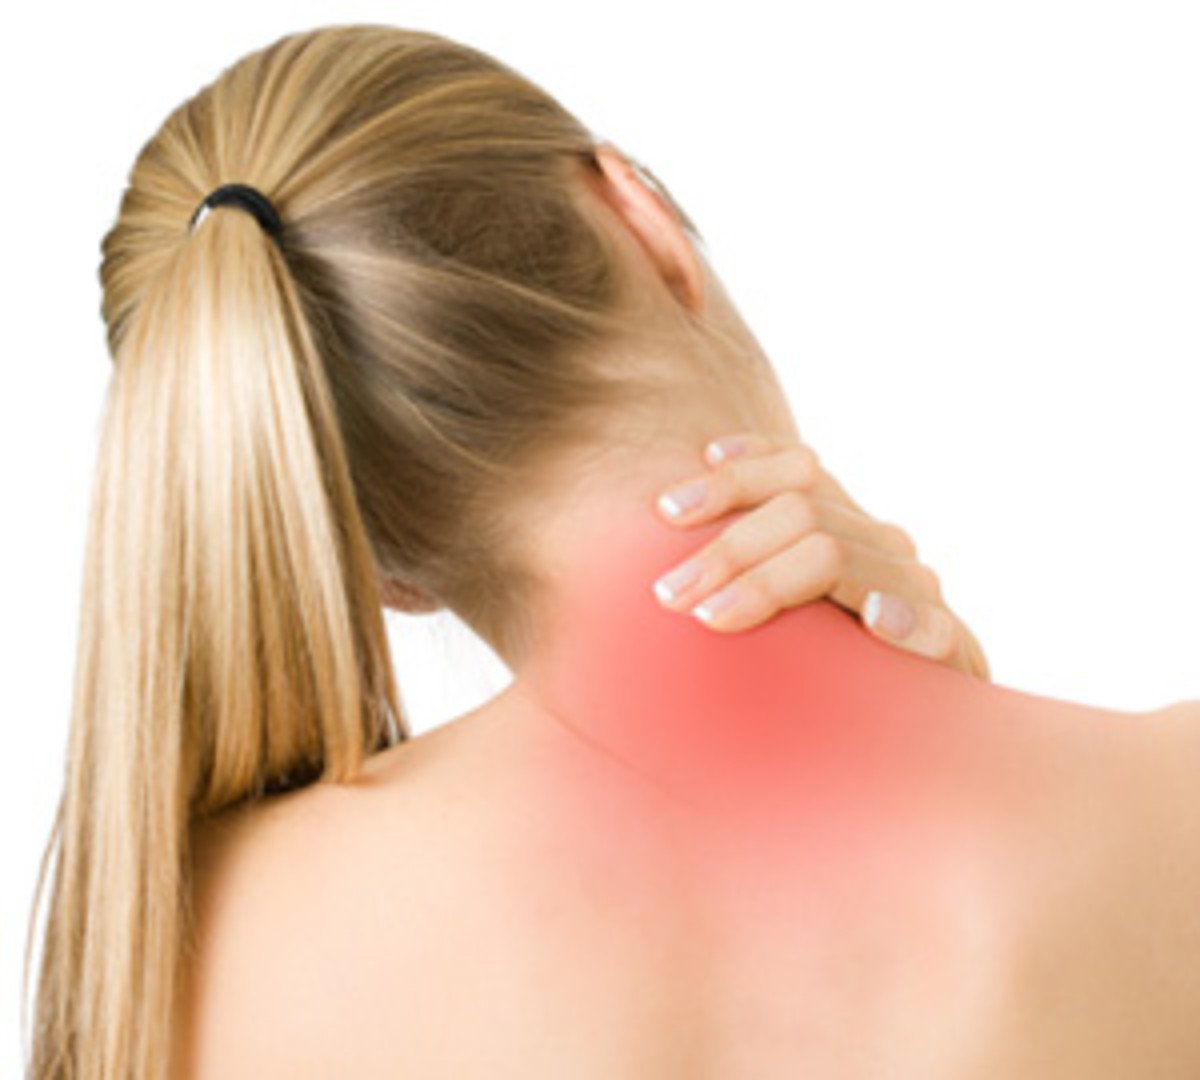 Neck Pain:What helps?